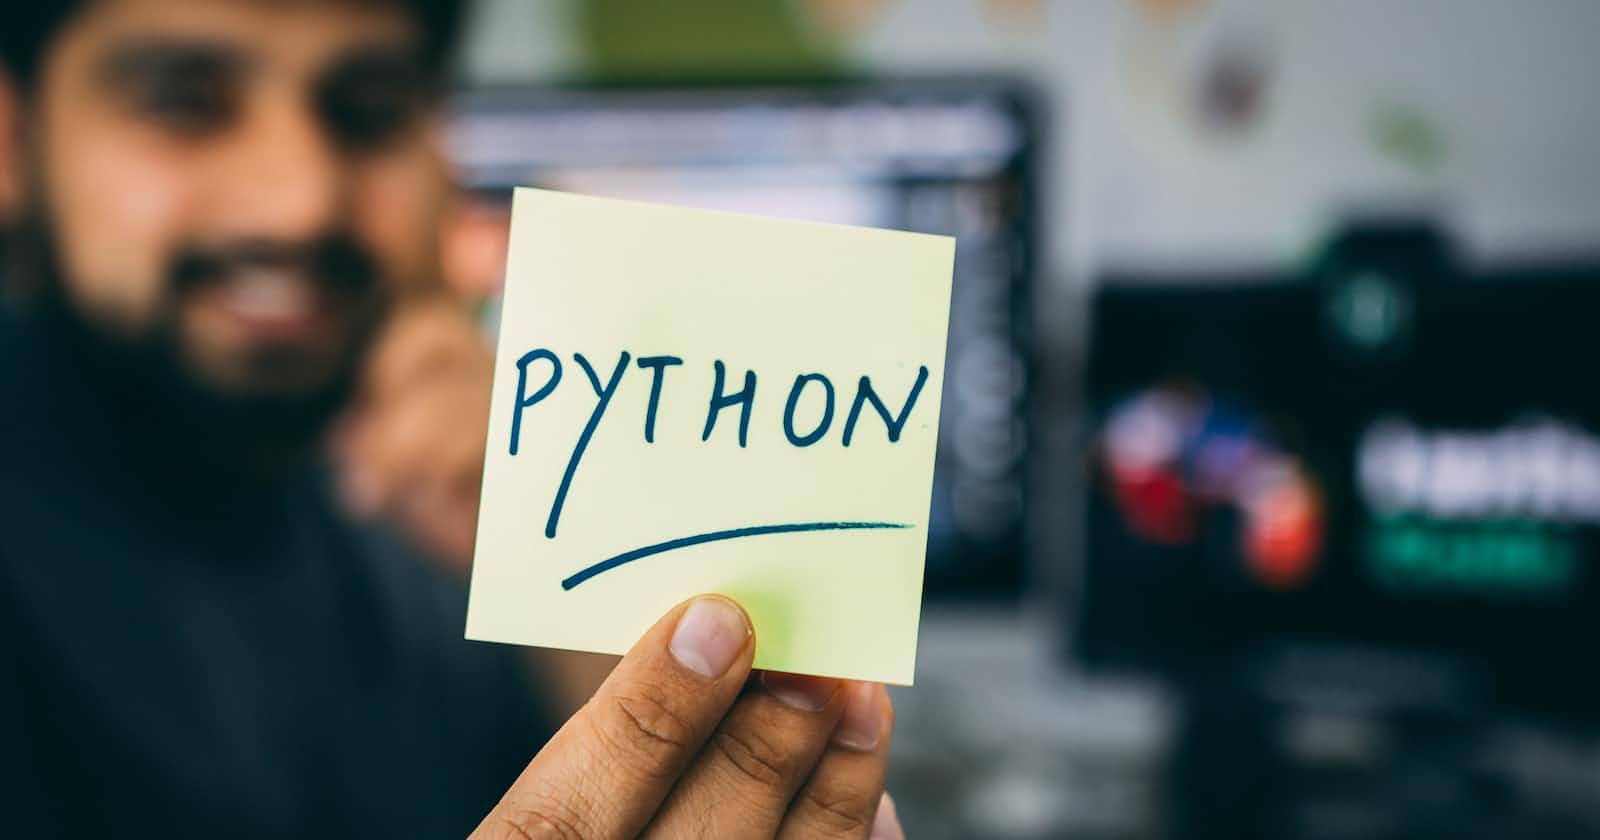 The Most Unusual Ways Python Is Used in Everyday Life